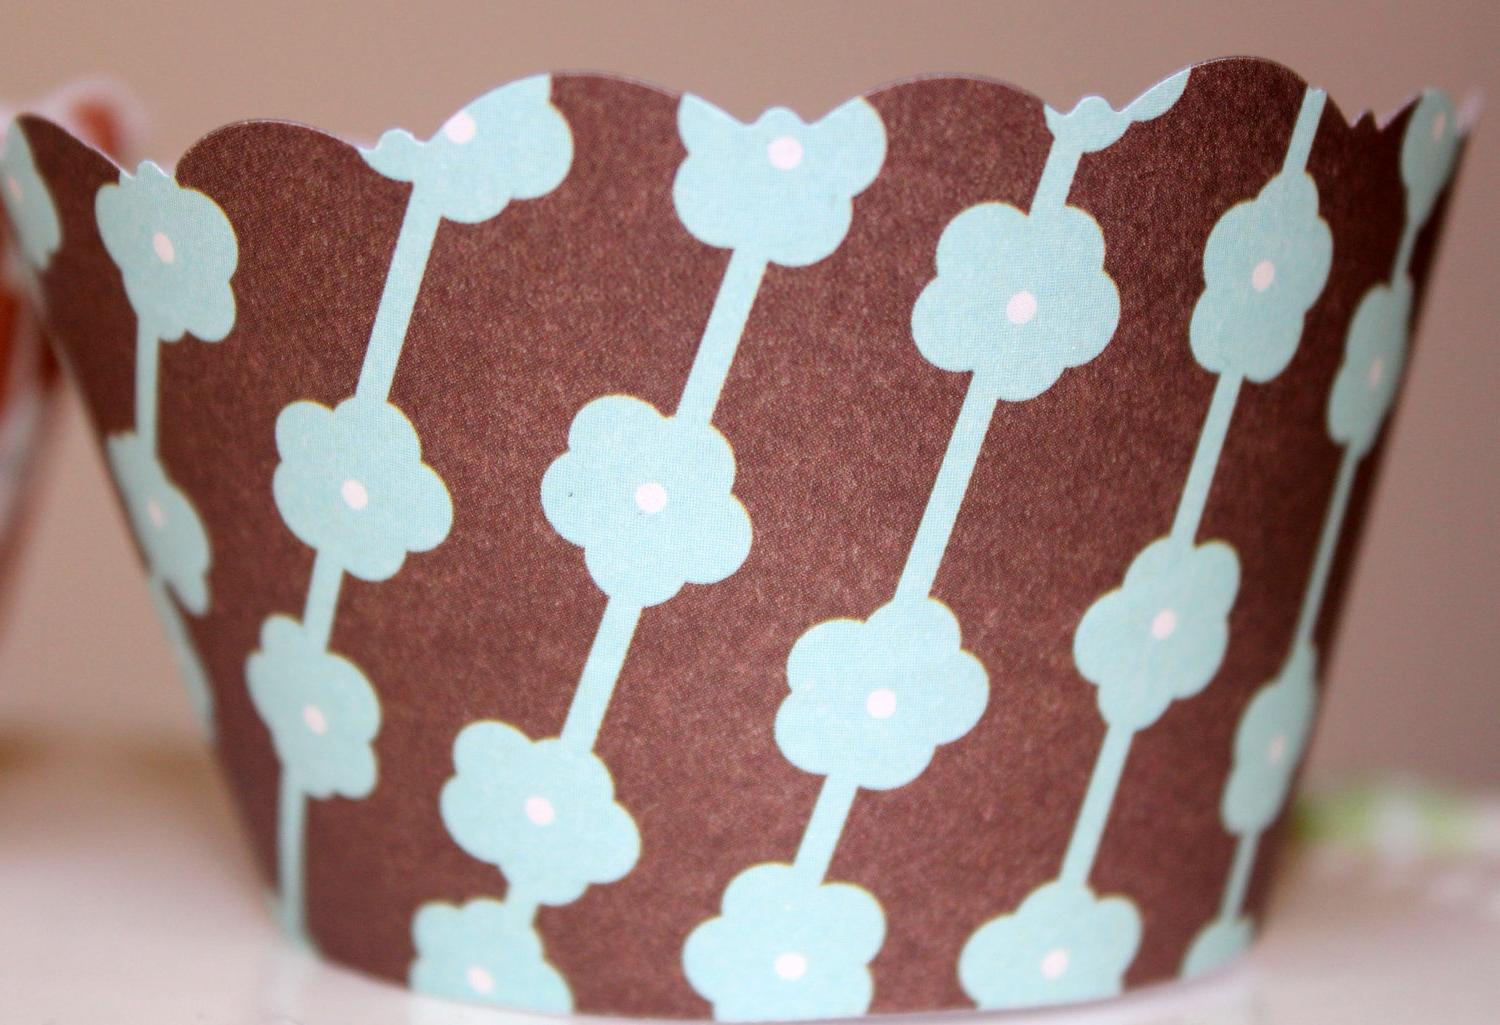 Tiffany Blue Blossom Cupcake Wrappers and Flags. From welldressedcupcakes